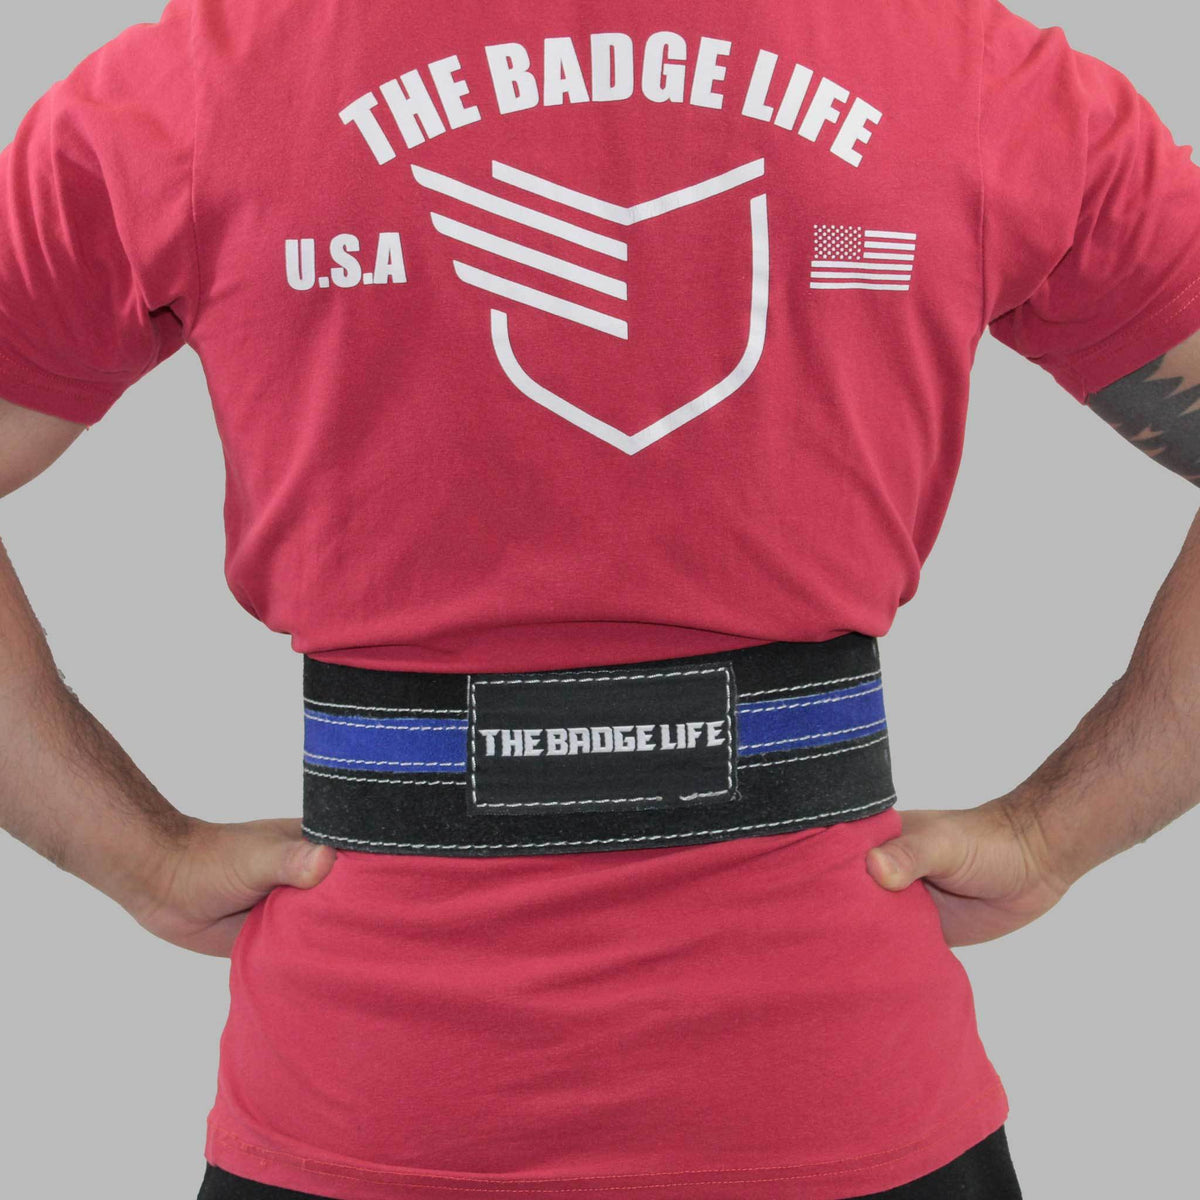 Weightlifting Belt - My Life Fitness